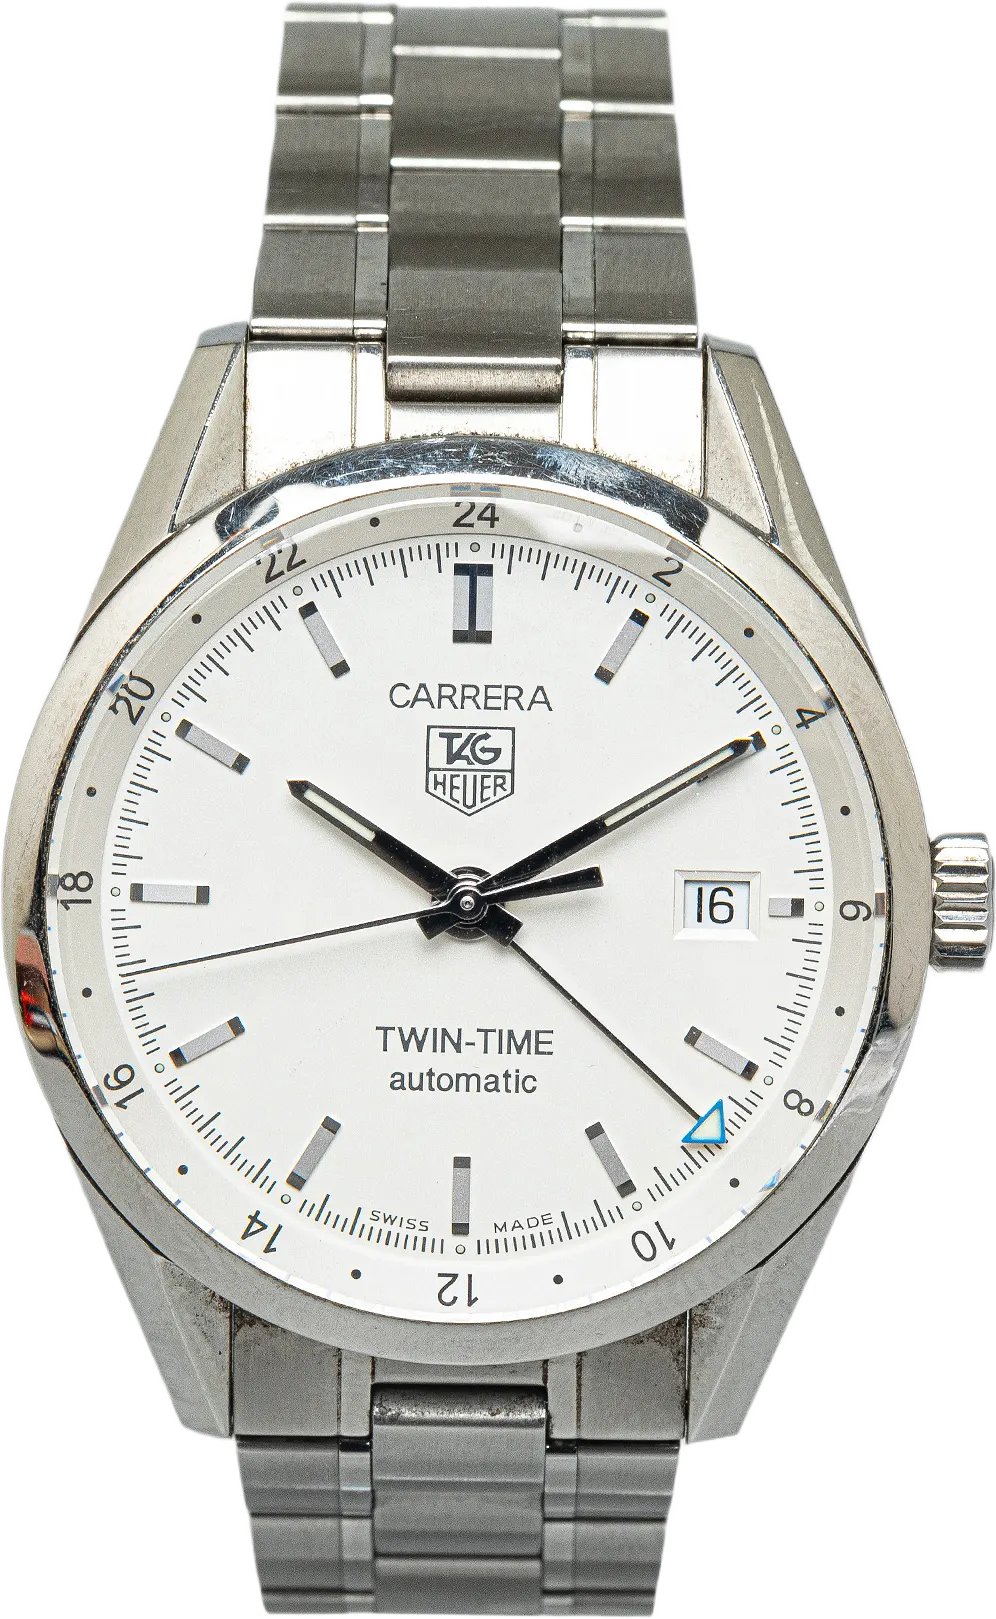 Tag Heuer Automatic Stainless Steel Carrera Twin-time Watch